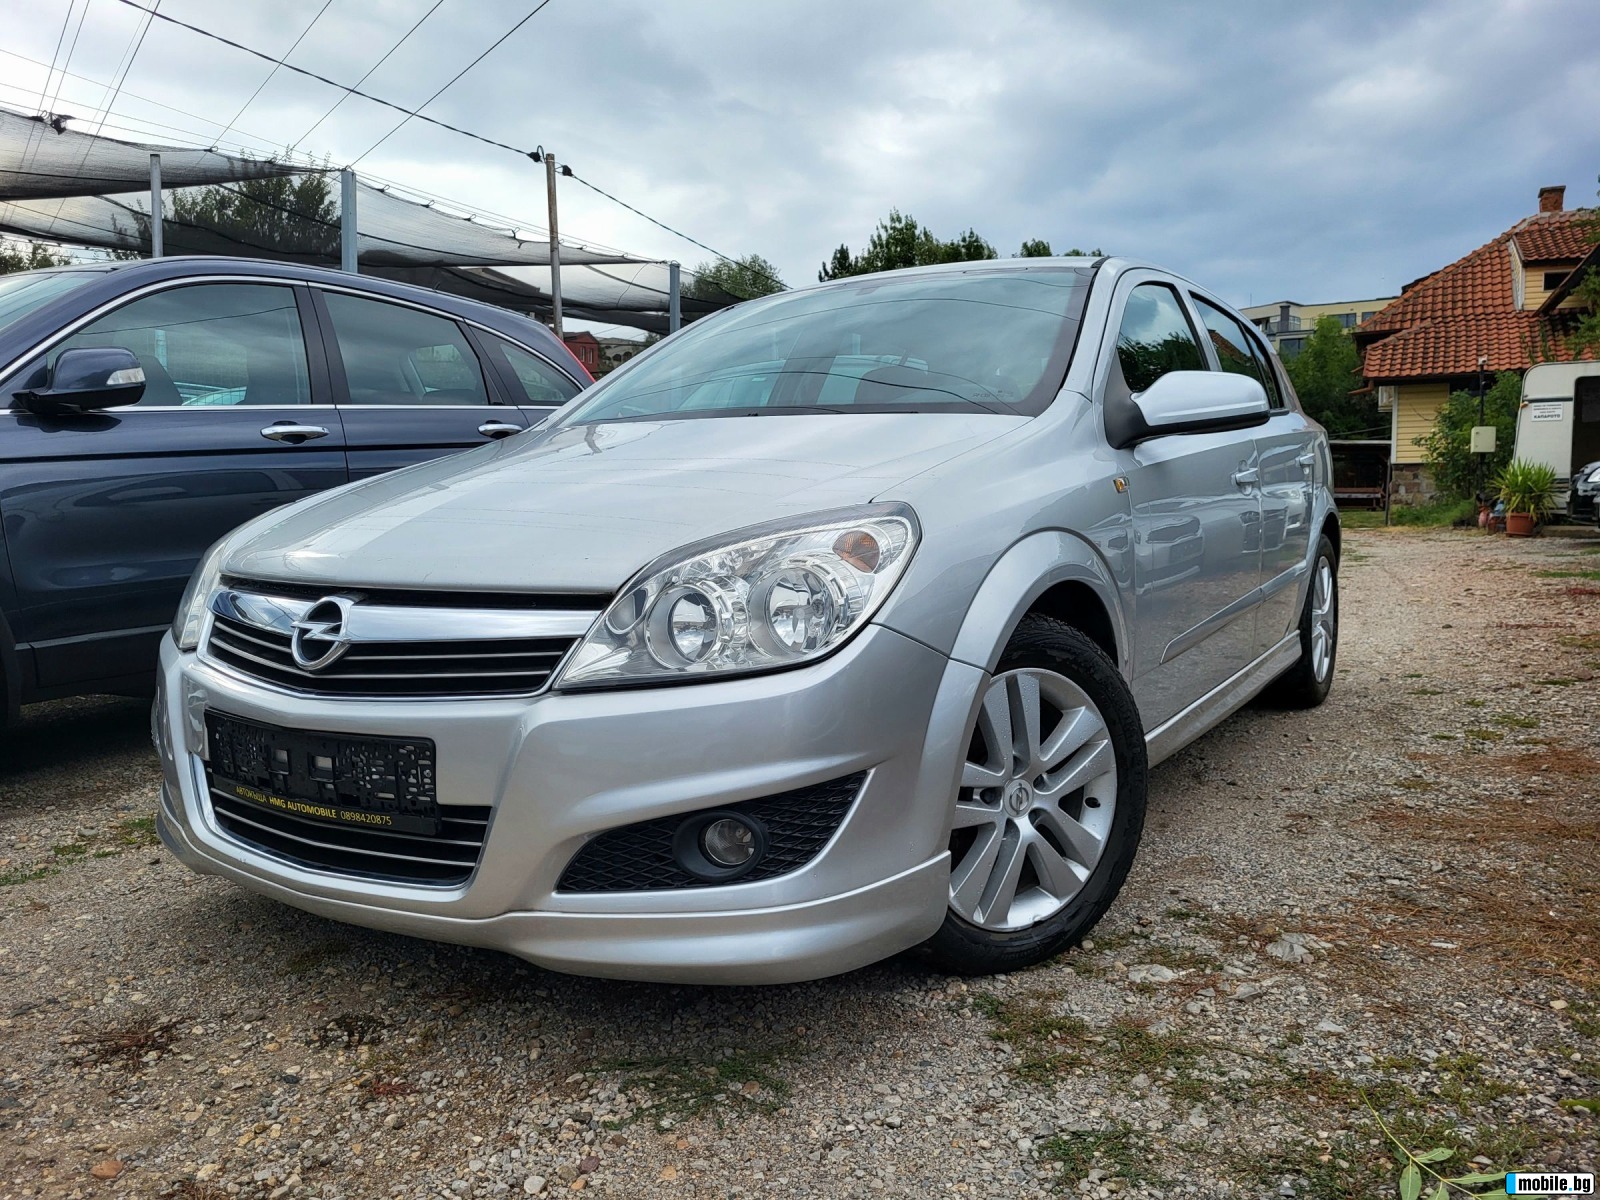 Opel Astra 1.7 CDTI - OPC PACKET  | Mobile.bg   3